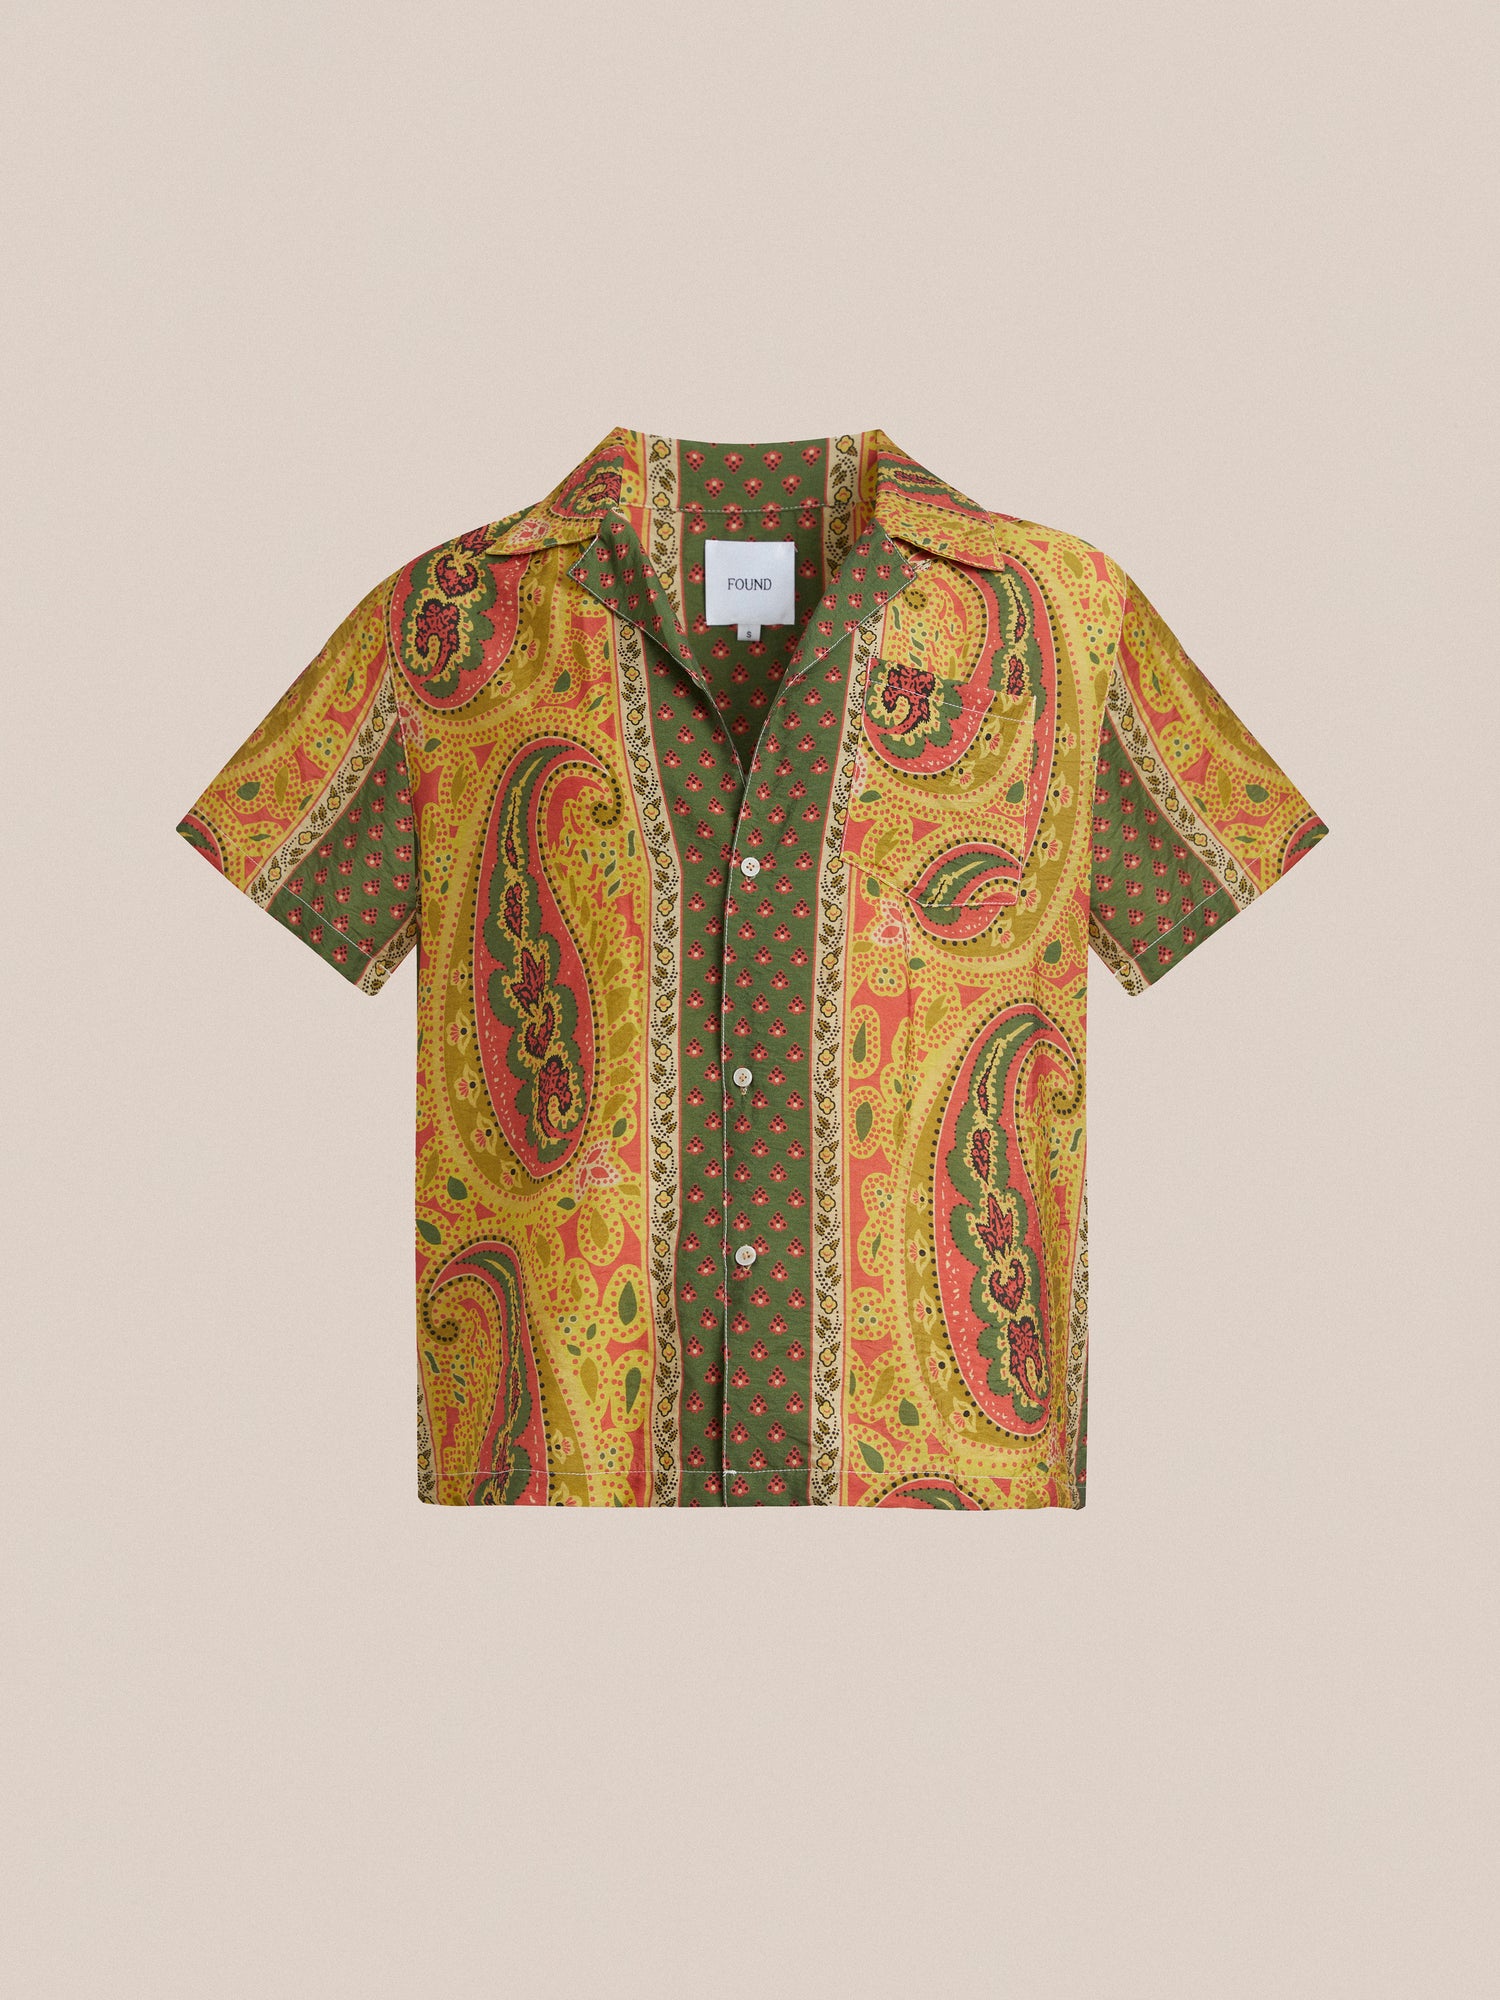 A Found Pench Paisley SS Camp Shirt with a Paisley print on it, reflecting cultural heritage.